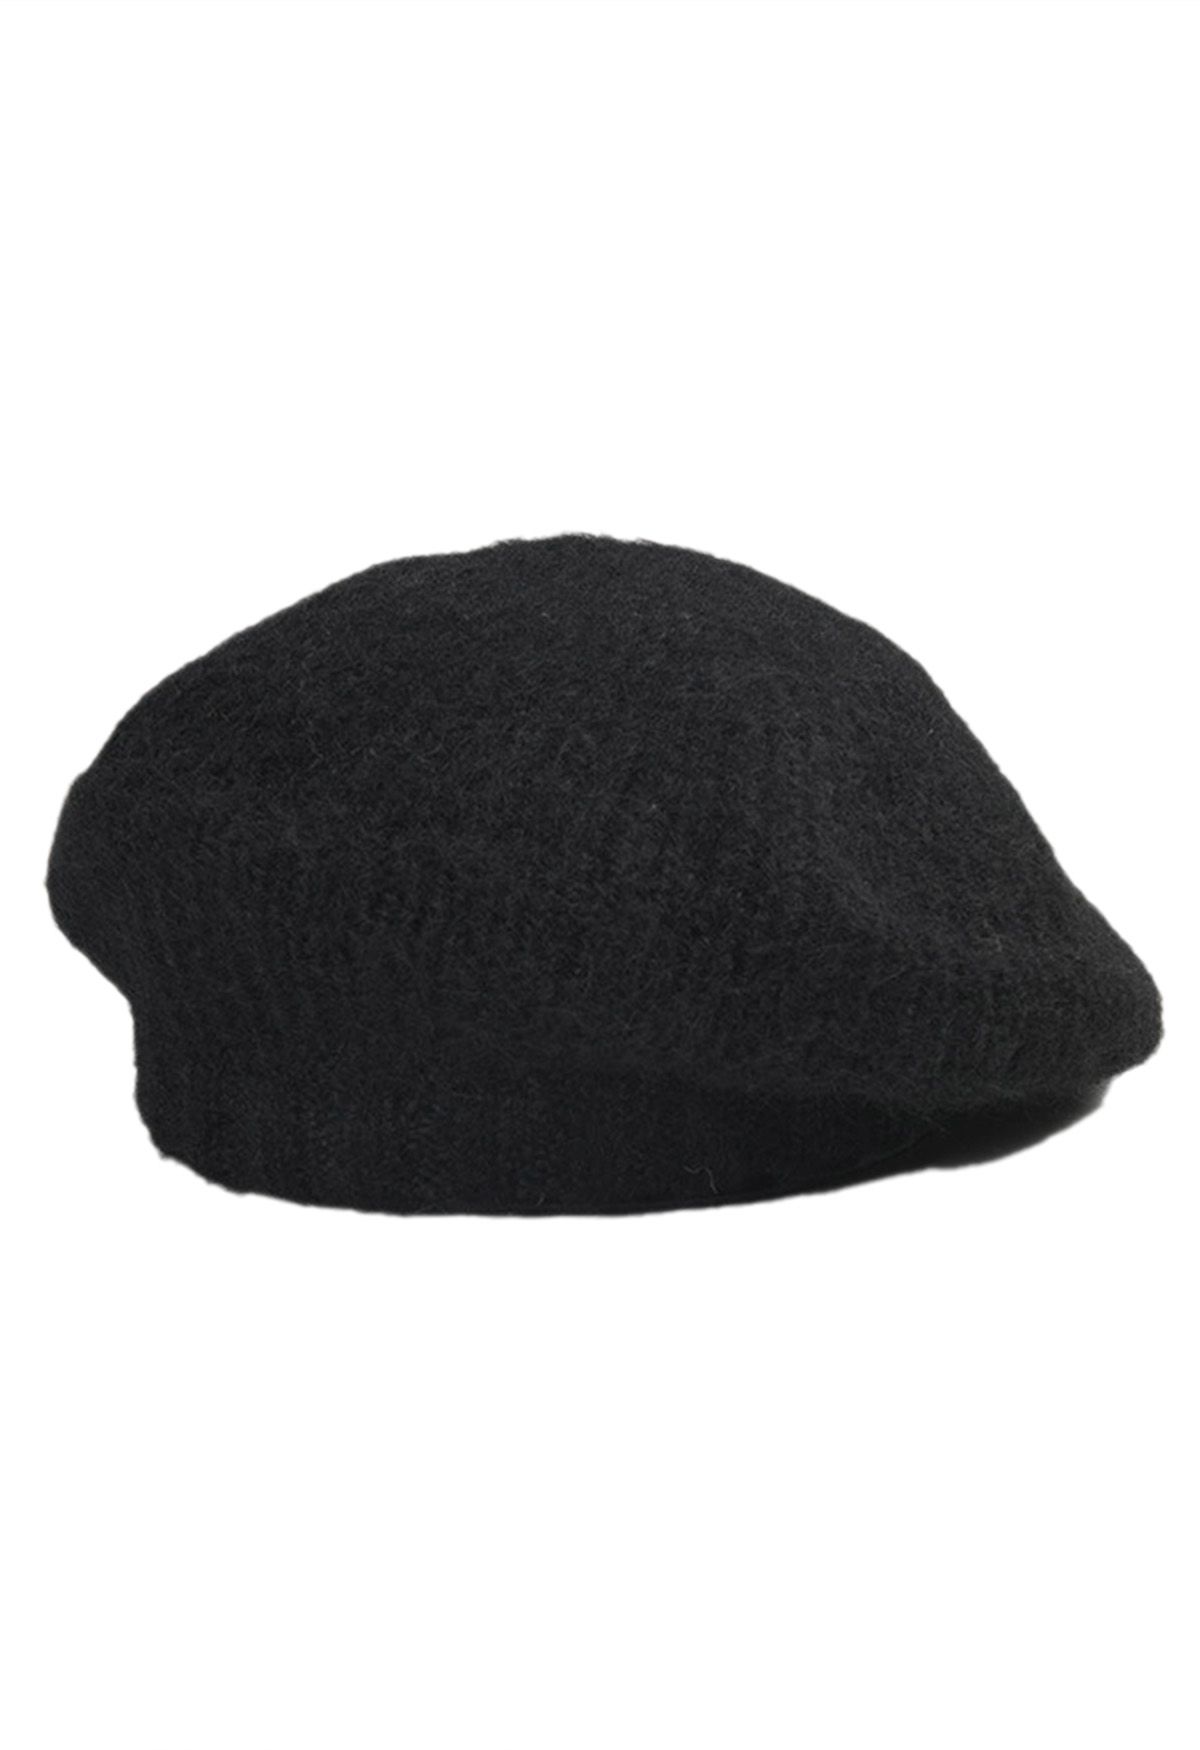 Fuzzy Wool-Blend Beret Hat in Black - Retro, Indie and Unique Fashion